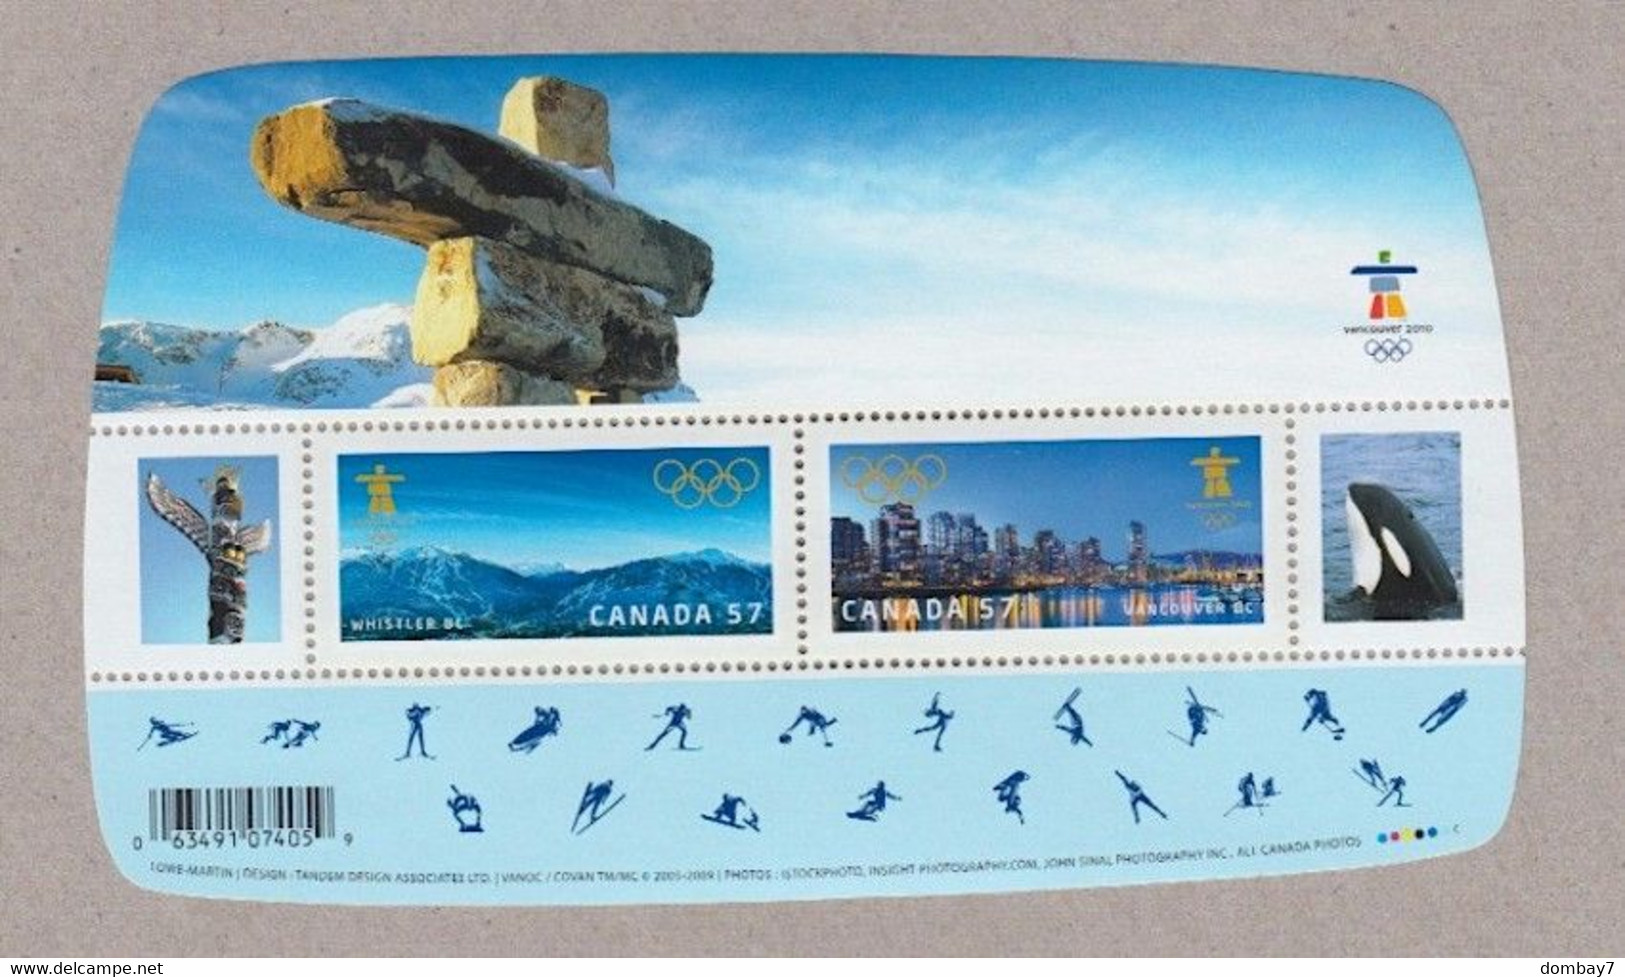 Qt. 2010 VANCOUVER WINTER OLYMPIC GAMES = INUKSHUK, EVENT SITES - Souvenir Sheet Of 2 Stamps = Canada 2010 Sc# 2366 - Winter 2010: Vancouver